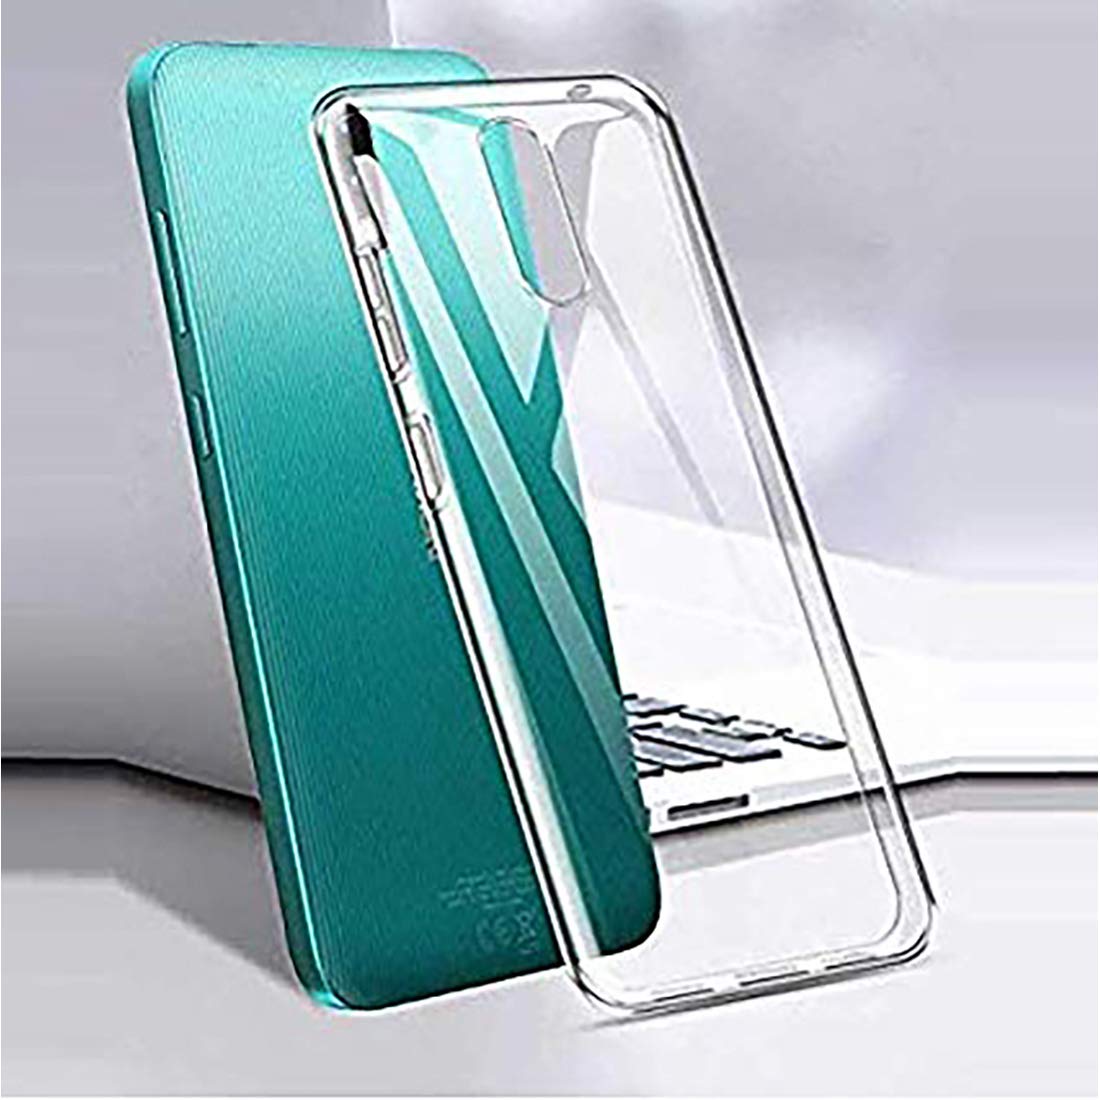 Clear Case for Nokia 2.3